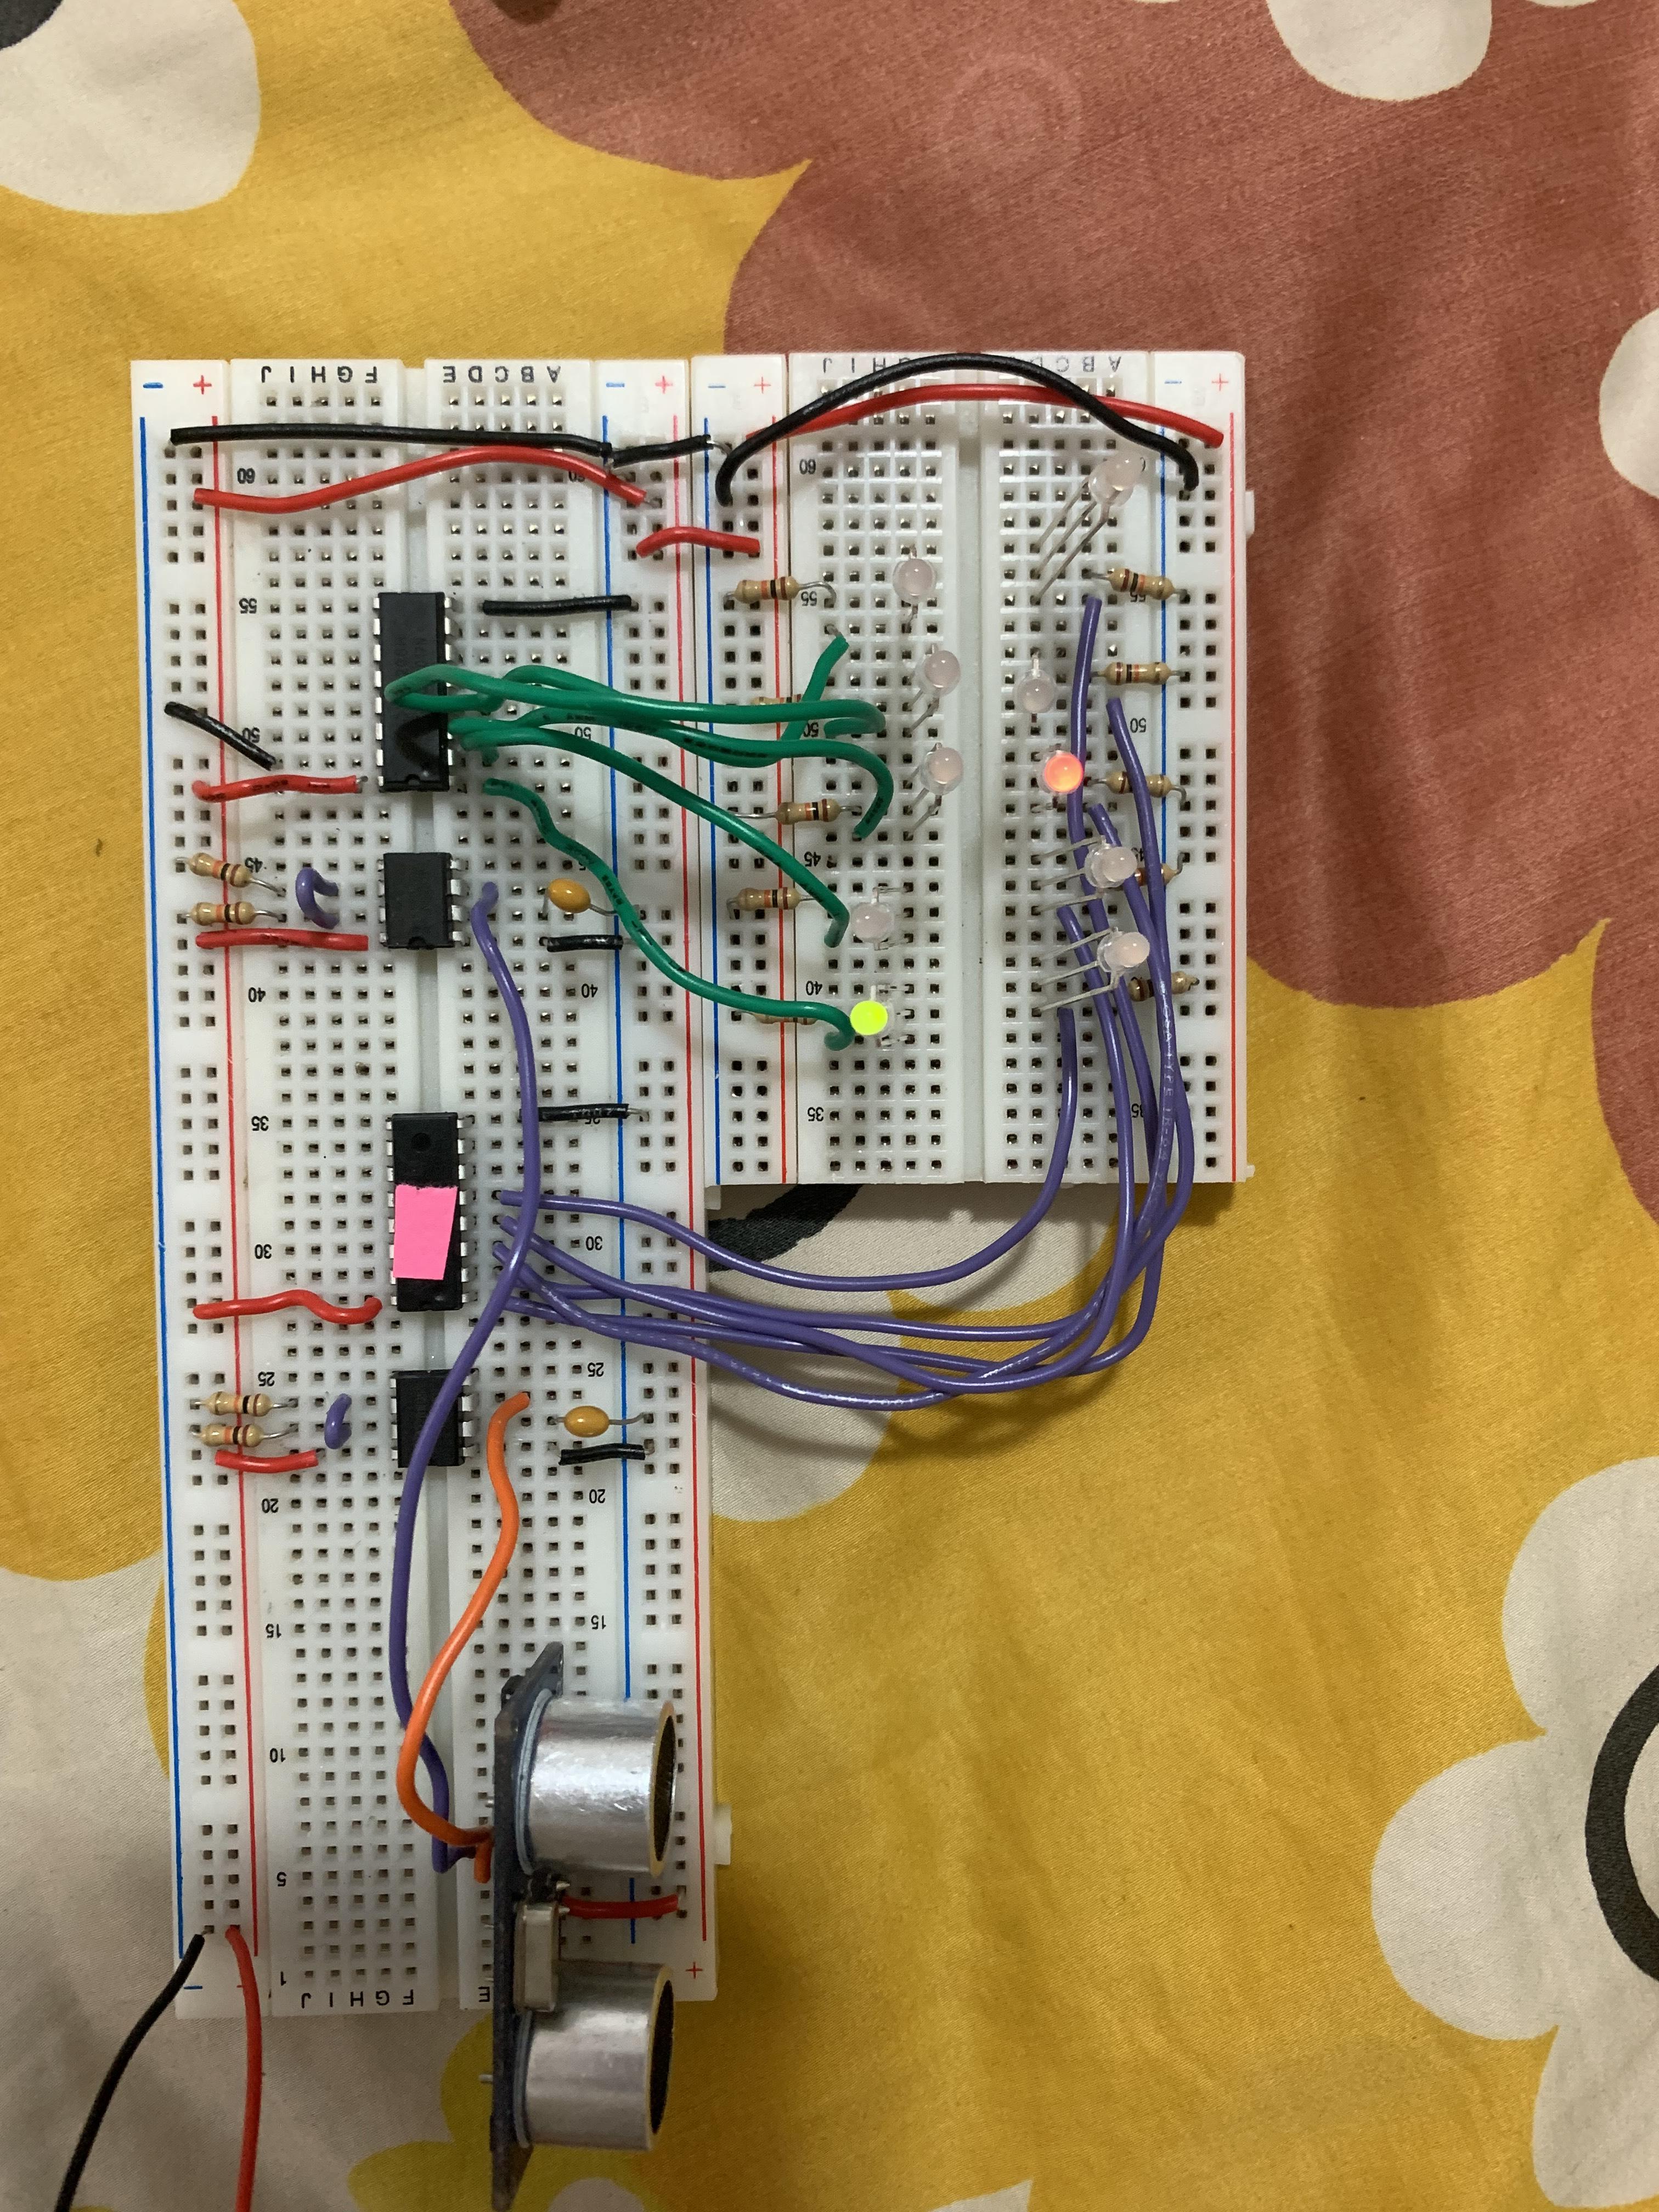 Motion Detector Using 555 Timer and 4017 Chips